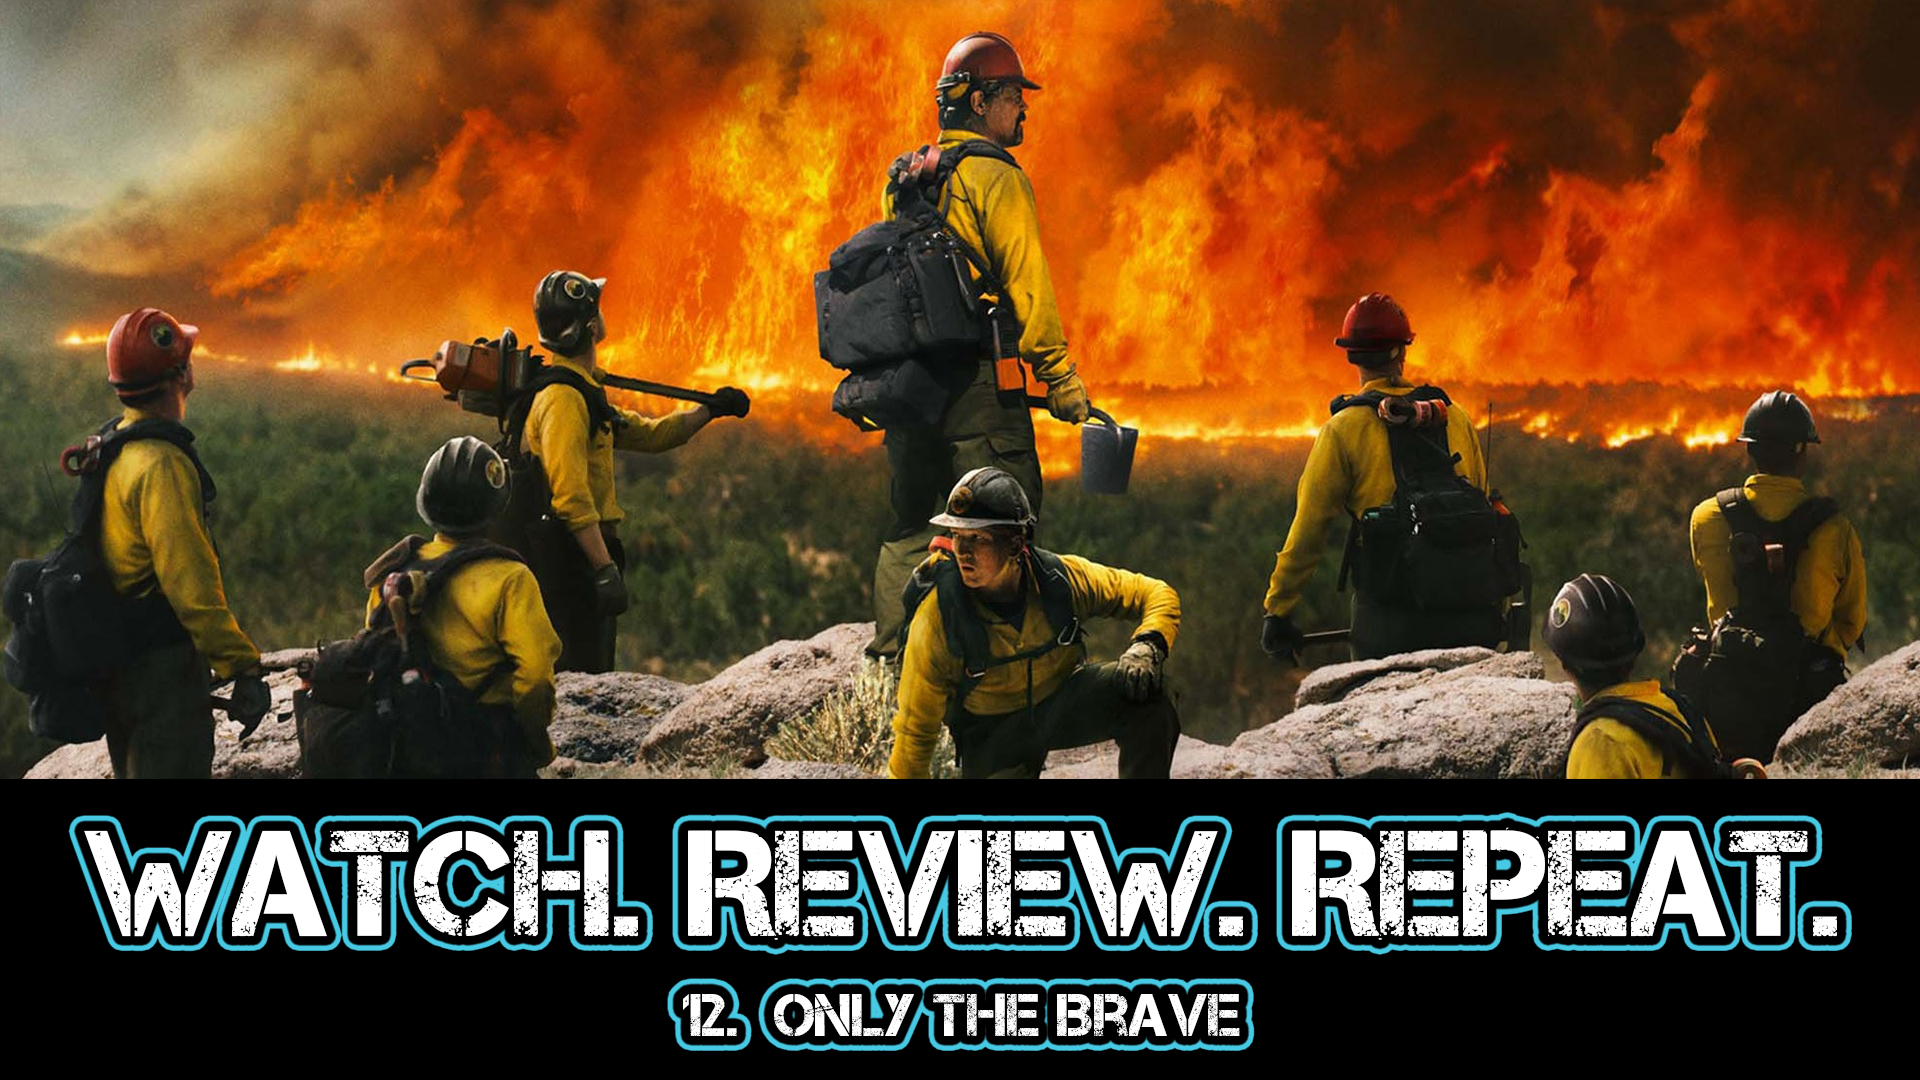 12. Only the Brave